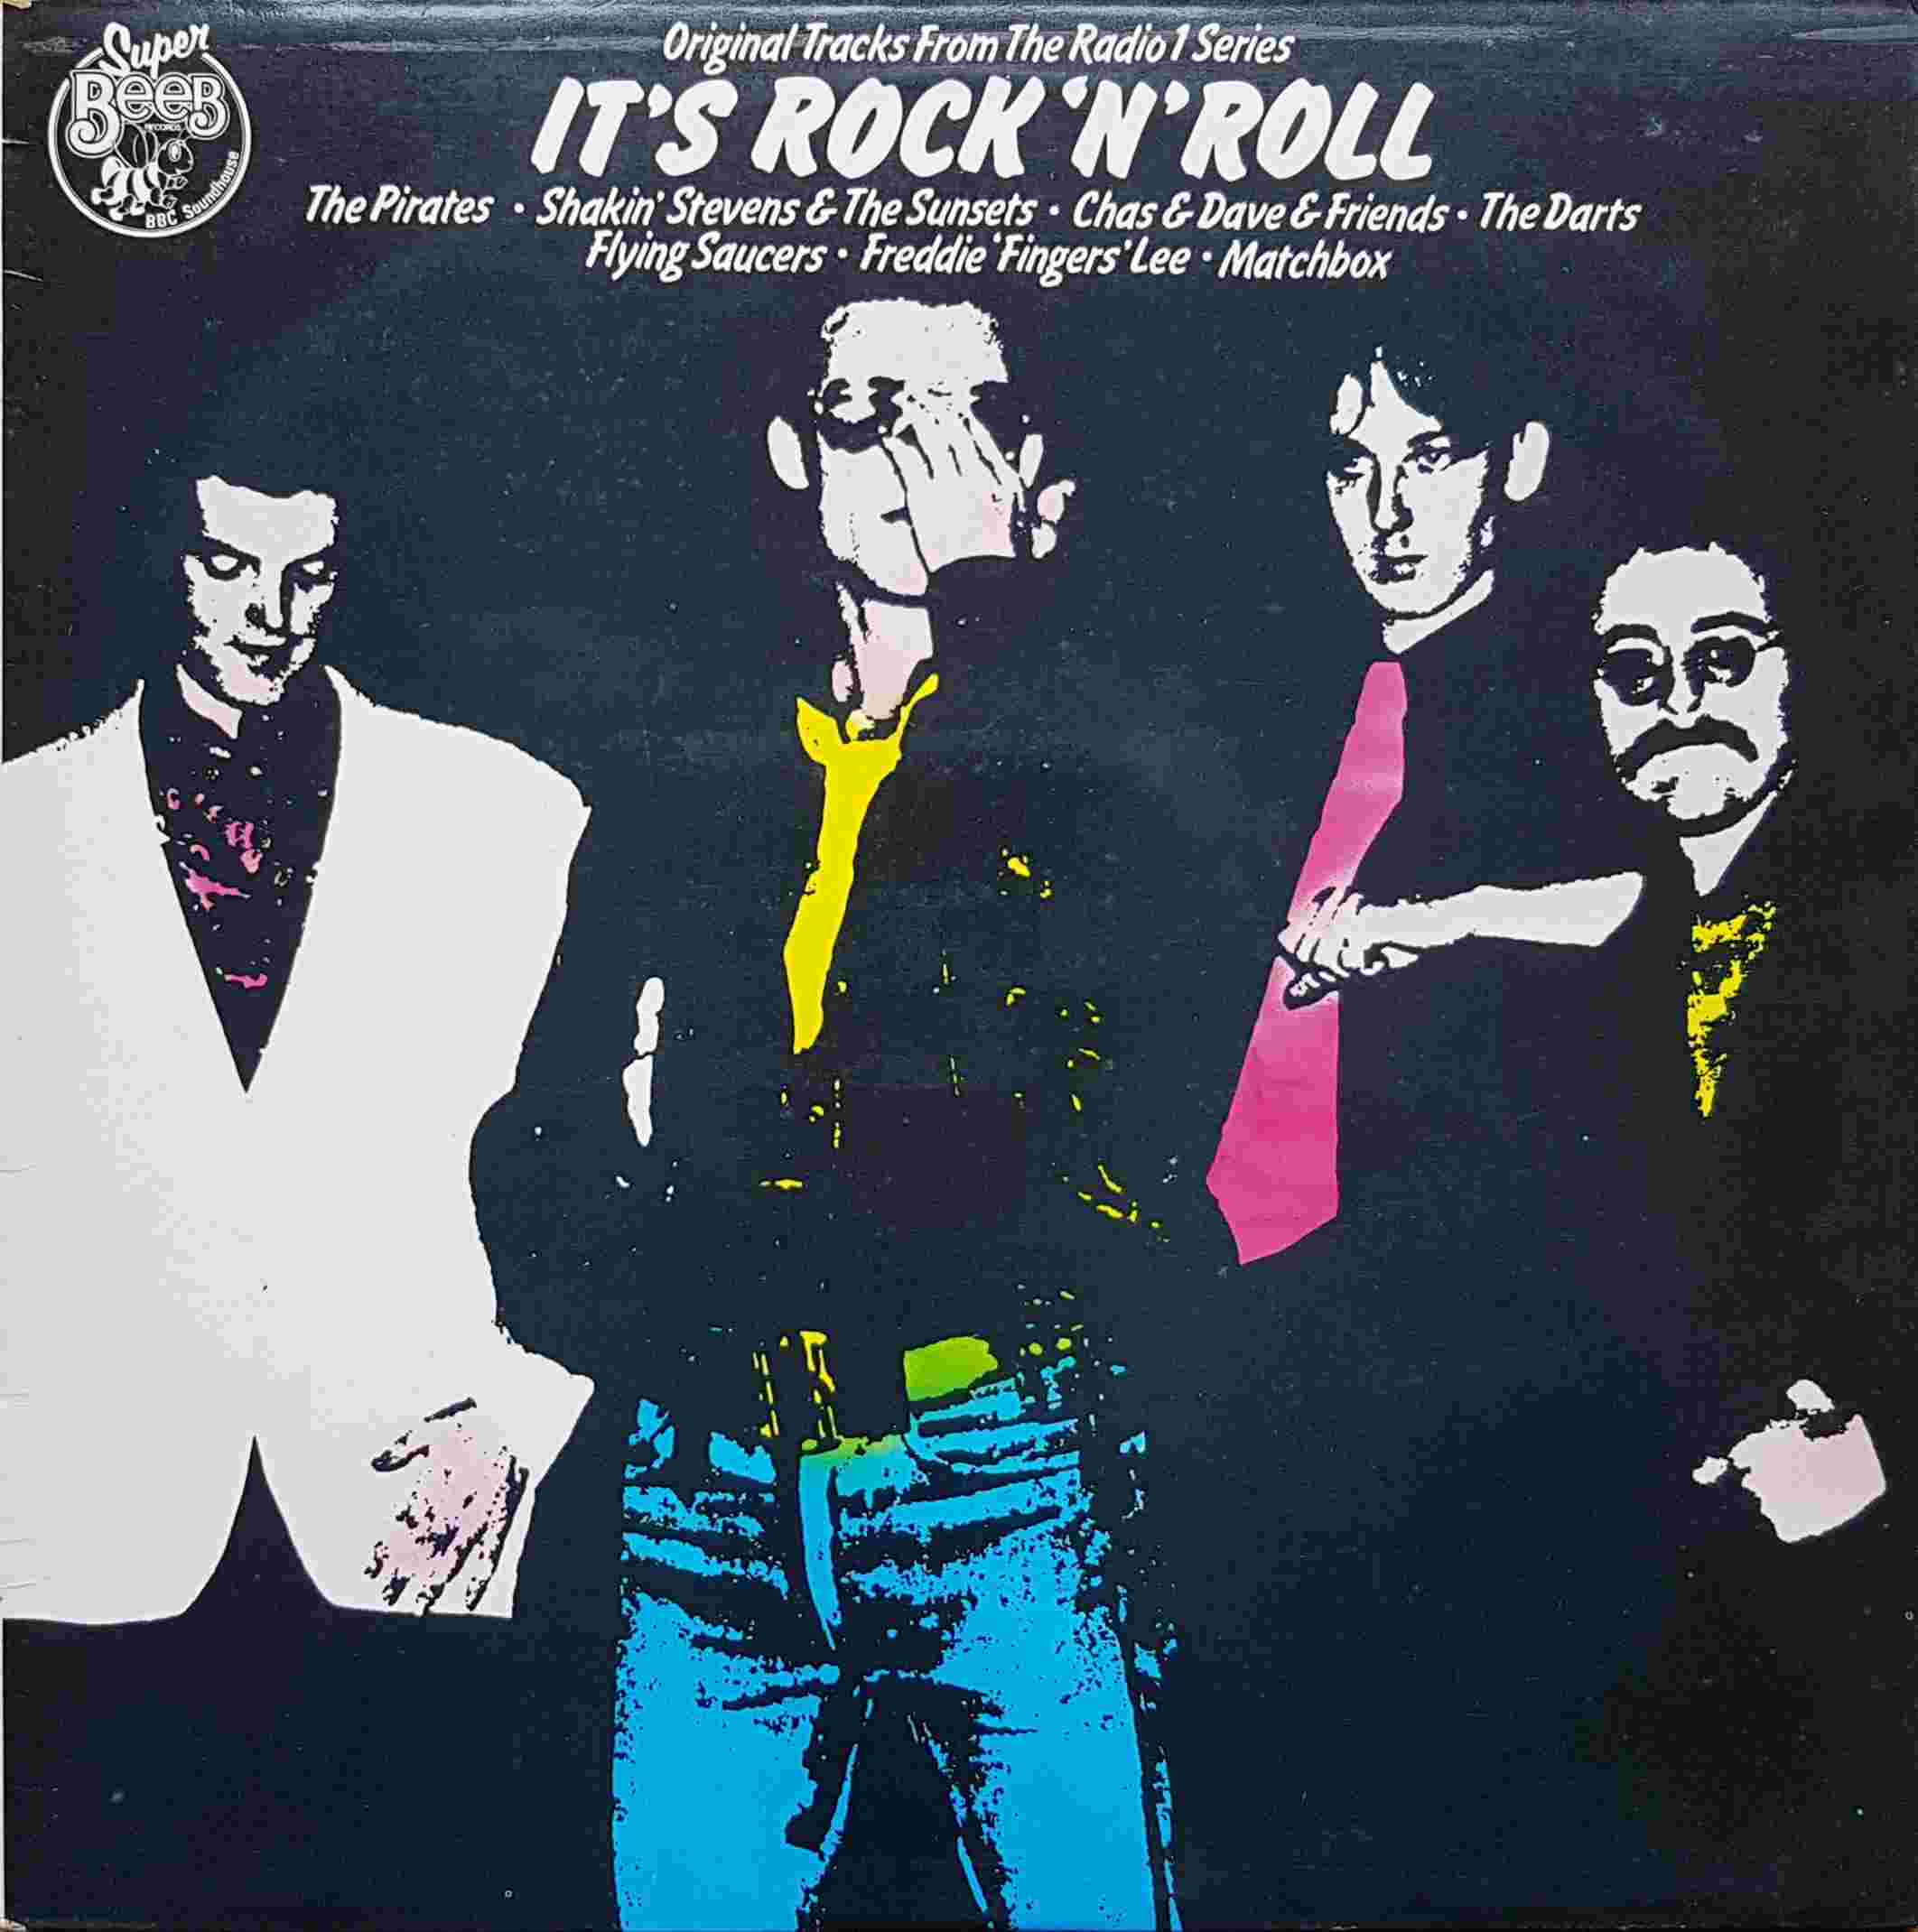 Picture of It's rock 'n' roll by artist Various from the BBC albums - Records and Tapes library